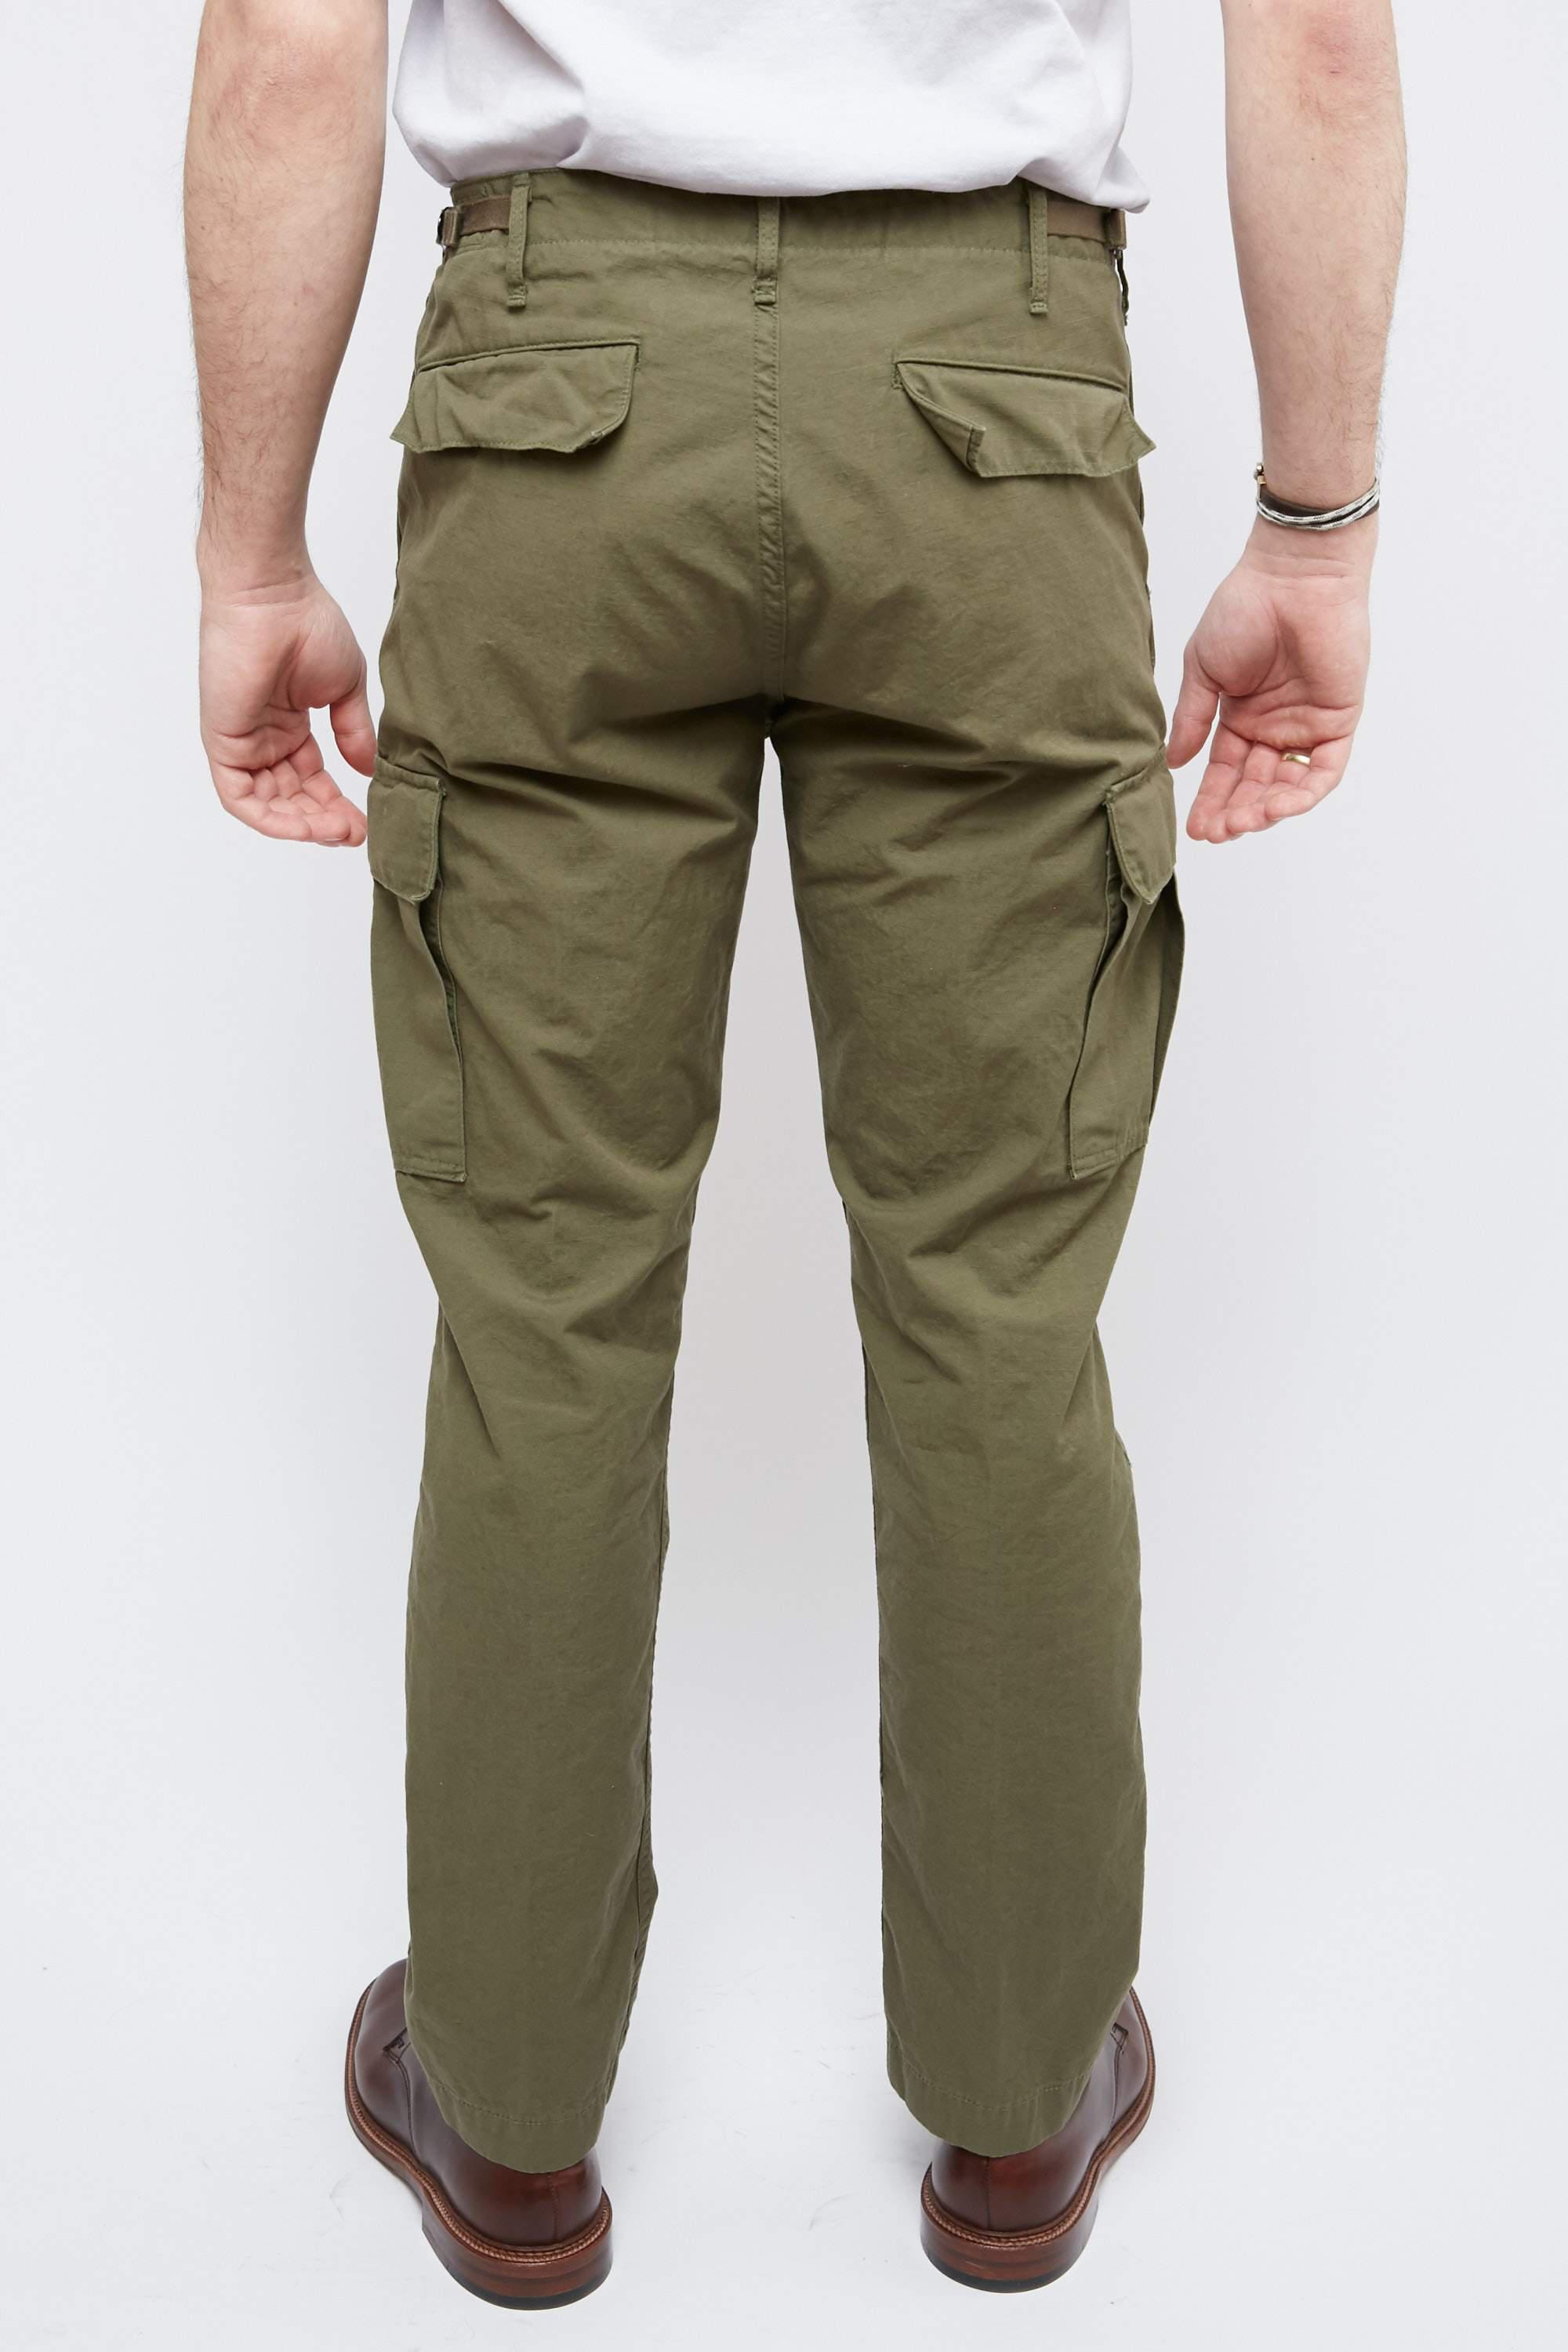 Orslow Cotton 6 Pocket Cargo Fatigue Pants in Green for Men - Lyst